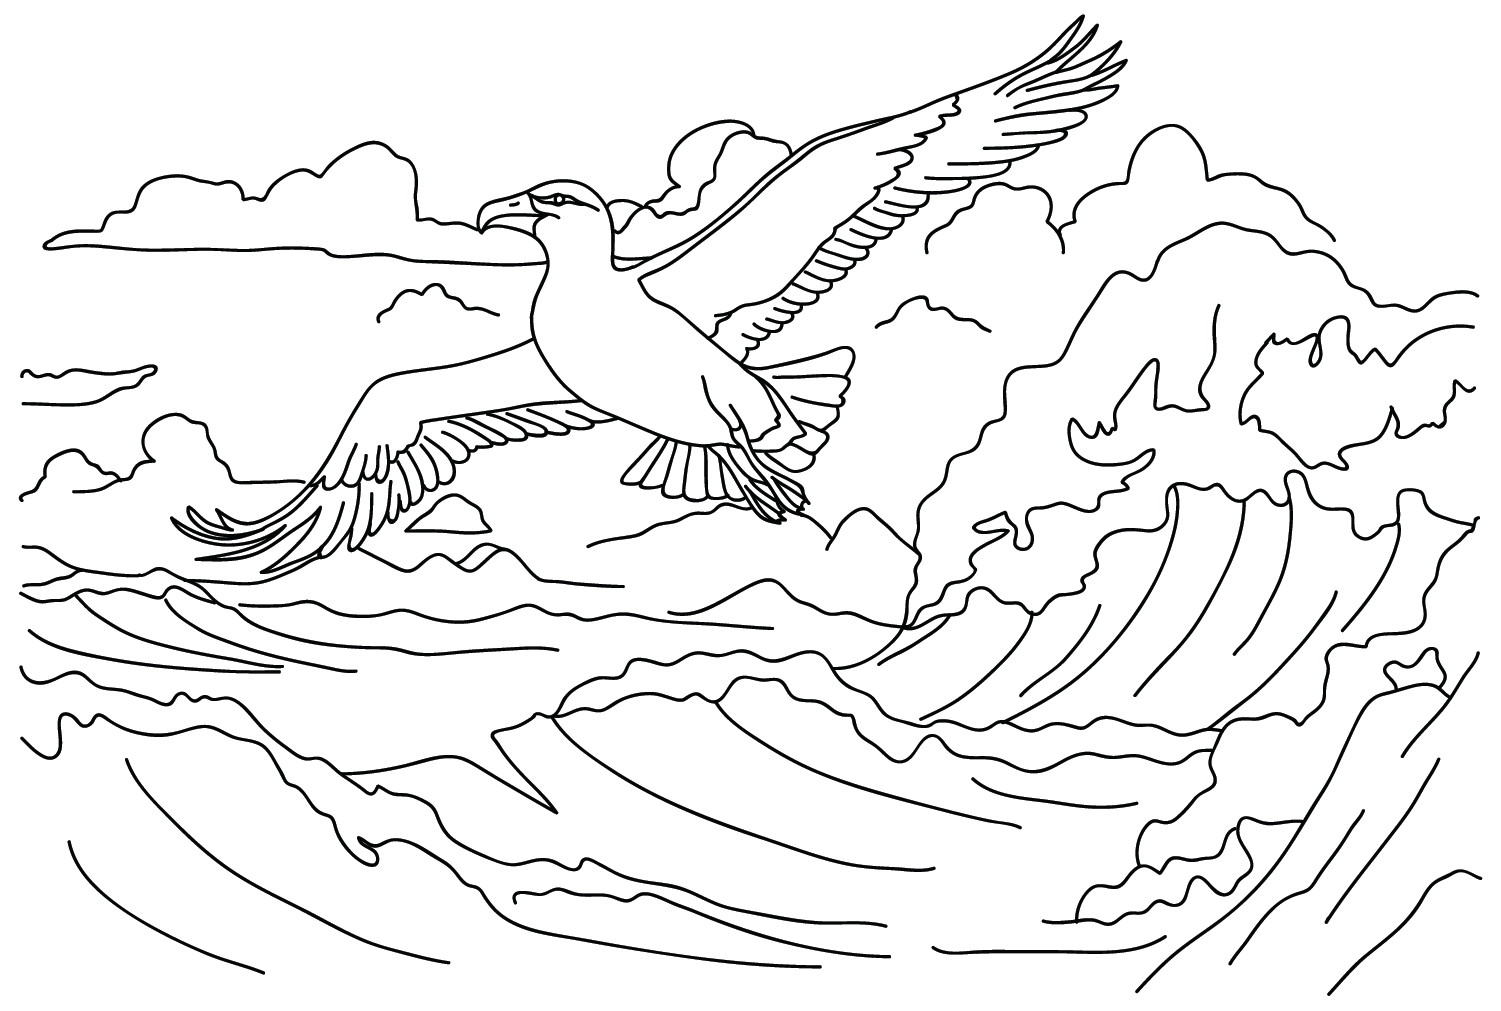 Drawing Albatross to Color from Albatross